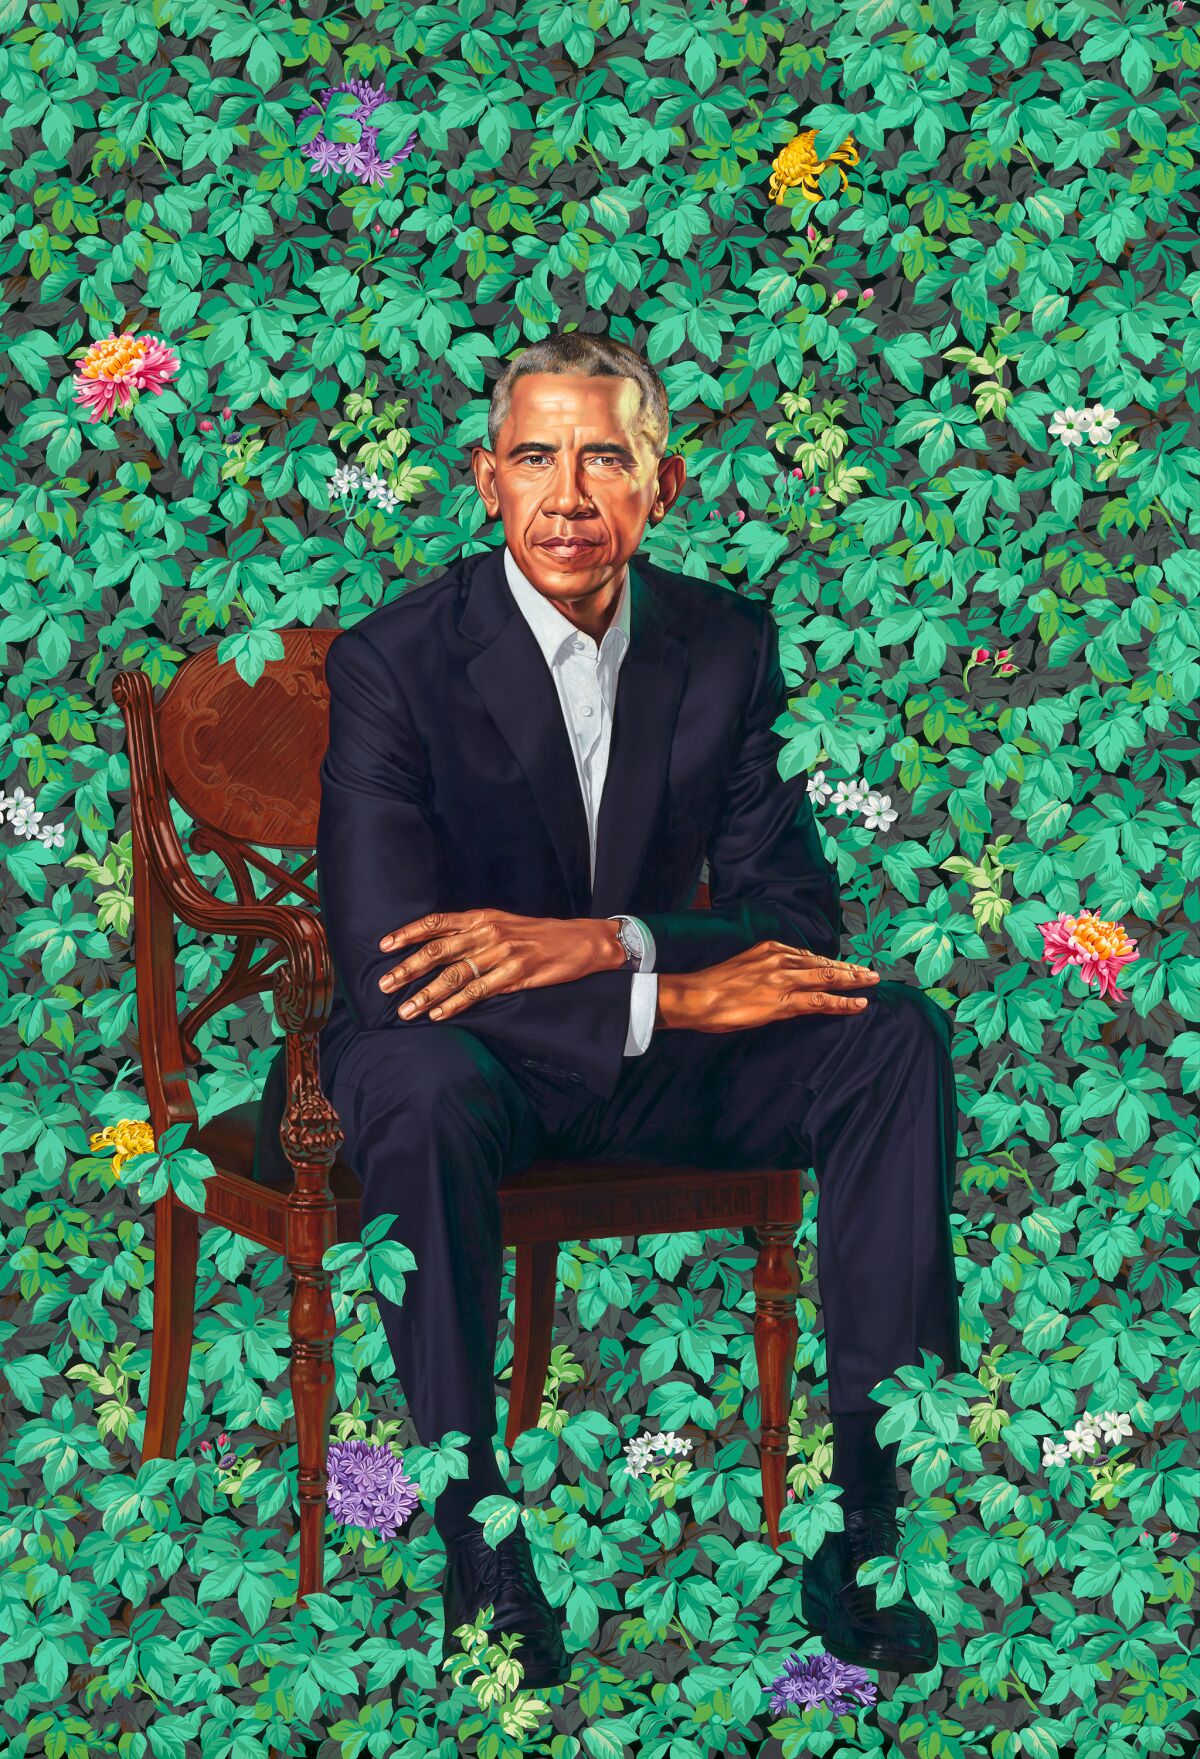 Kehinde Wiley's portrait of President Obama